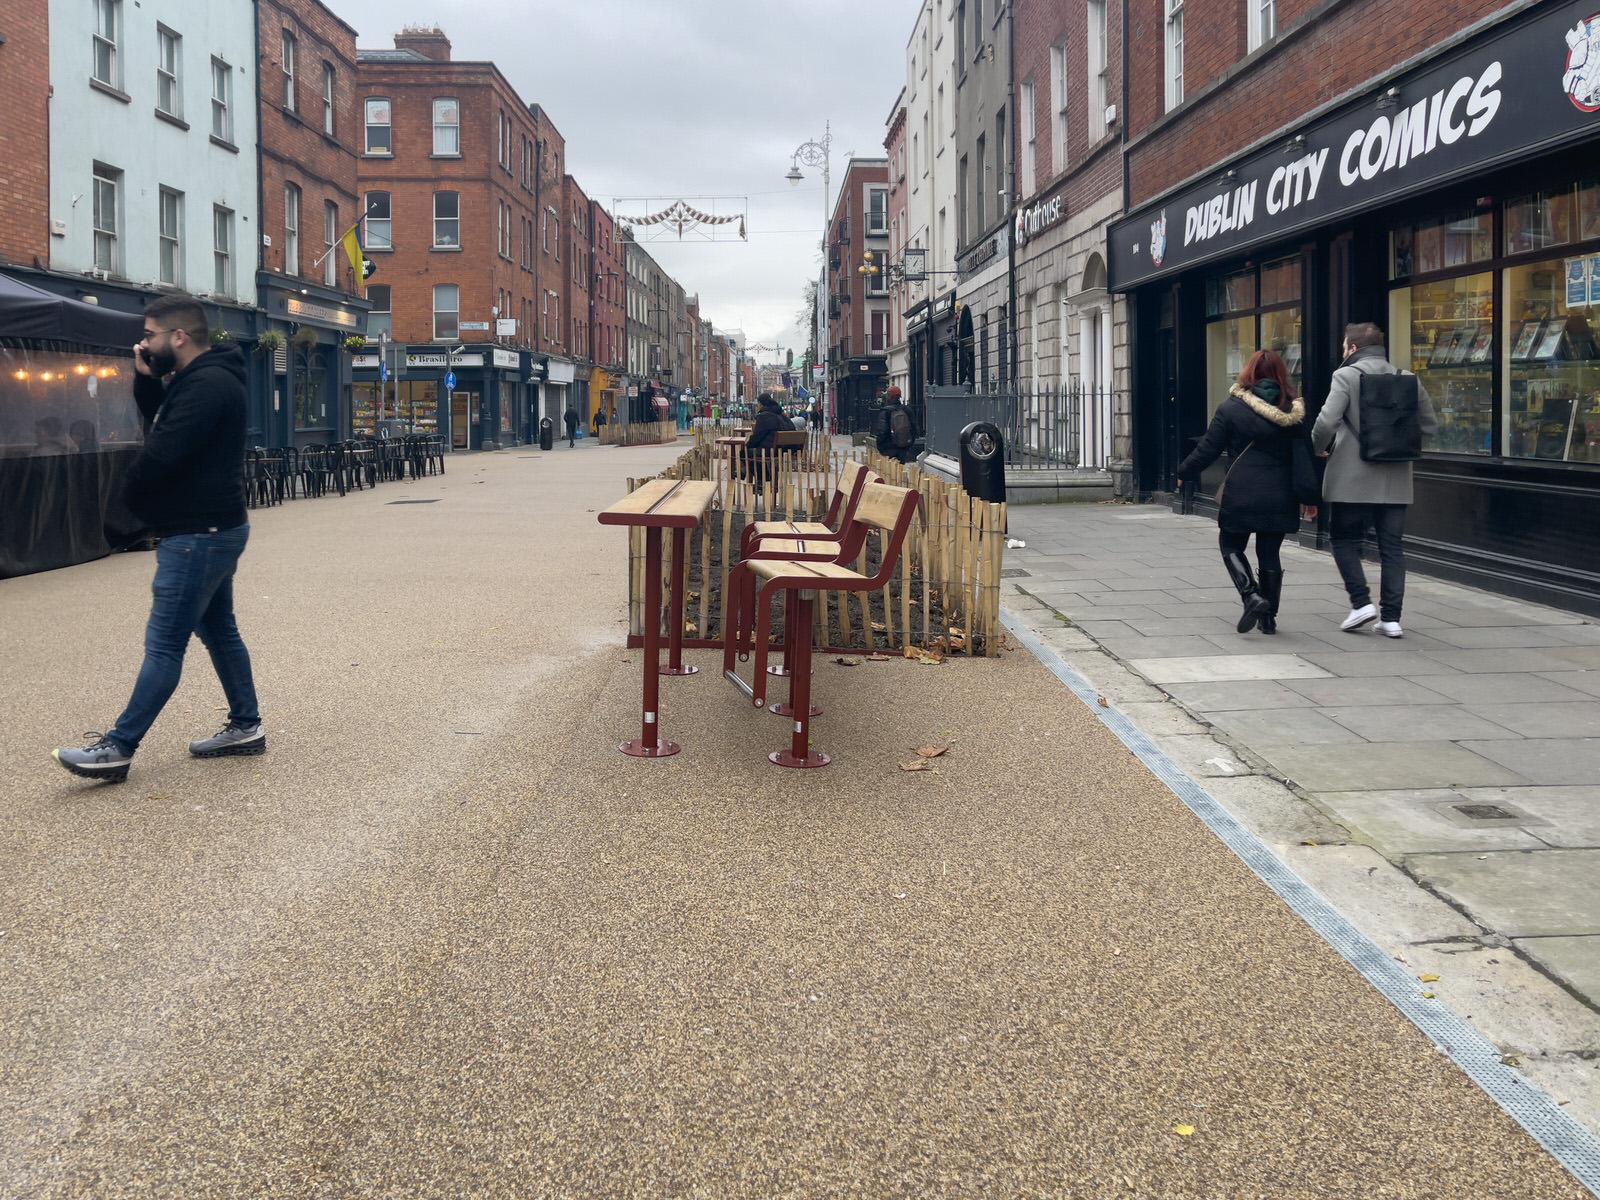 THE NEW STREET FURNITURE IS BEING INSTALLED ON CAPEL STREET [BUT THERE ARE FEW VISITORS TO BE SEEN TODAY] 007